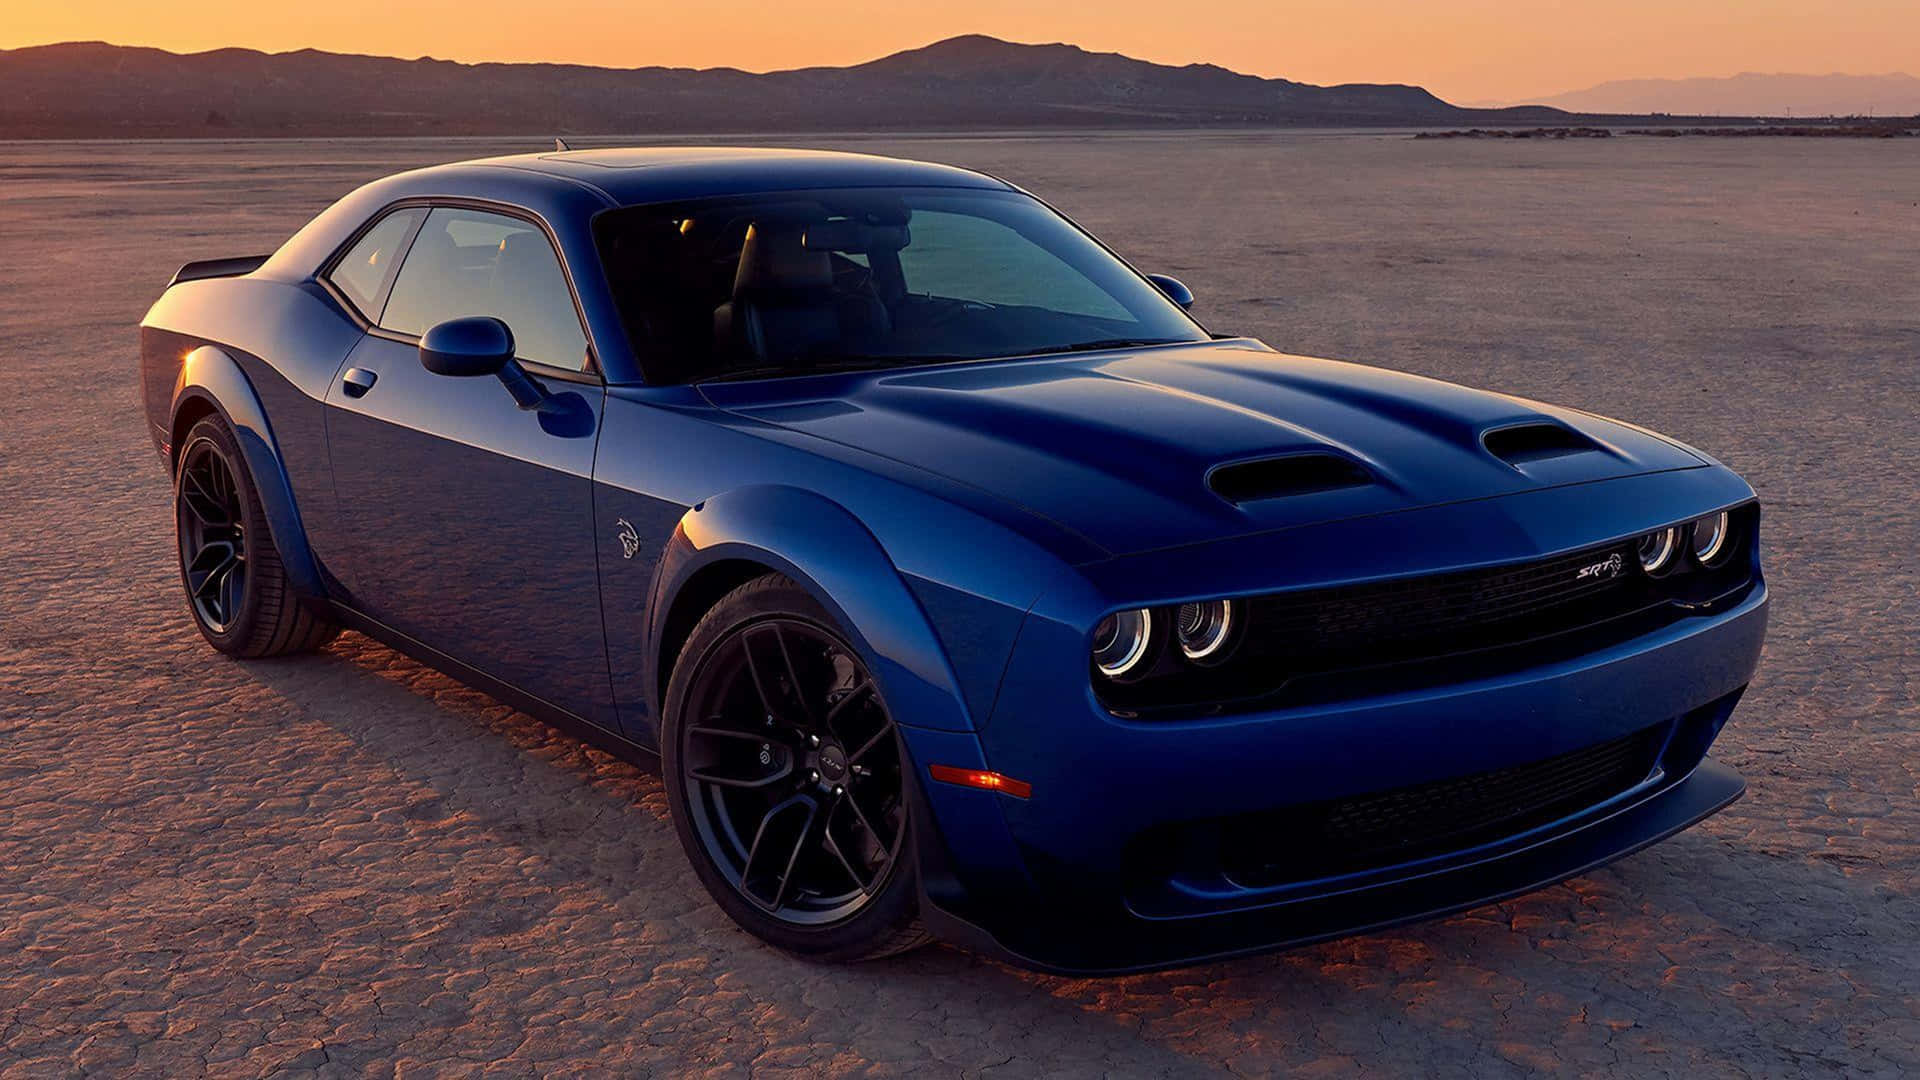 "Dominate the streets with the Dodge Hellcat" Wallpaper